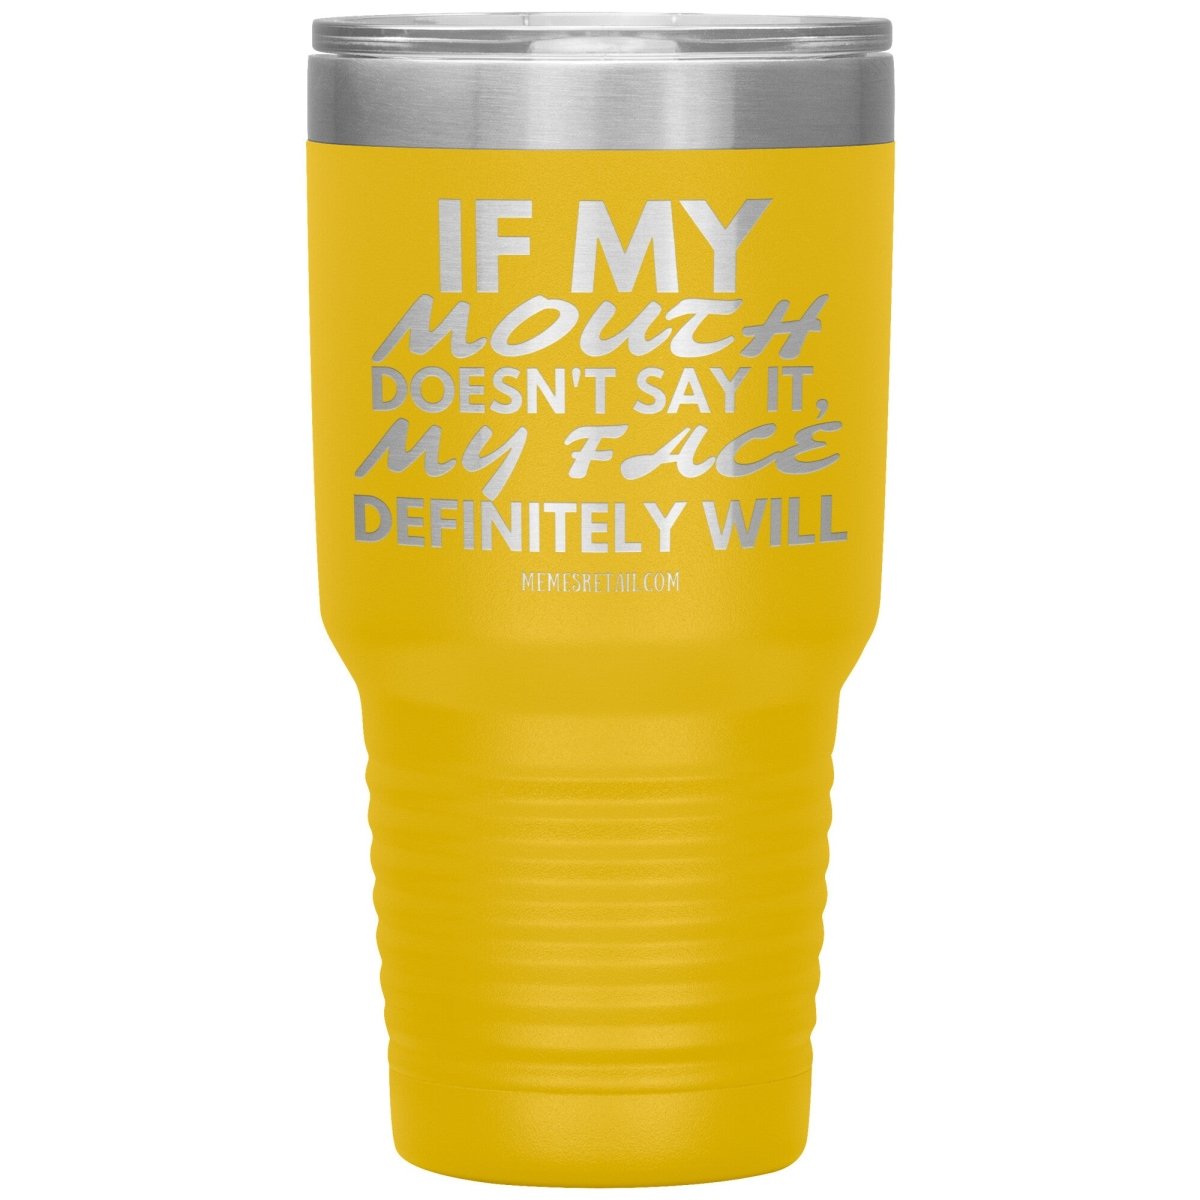 If my mouth doesn't say it, my face definitely will Tumblers, 30oz Insulated Tumbler / Yellow - MemesRetail.com